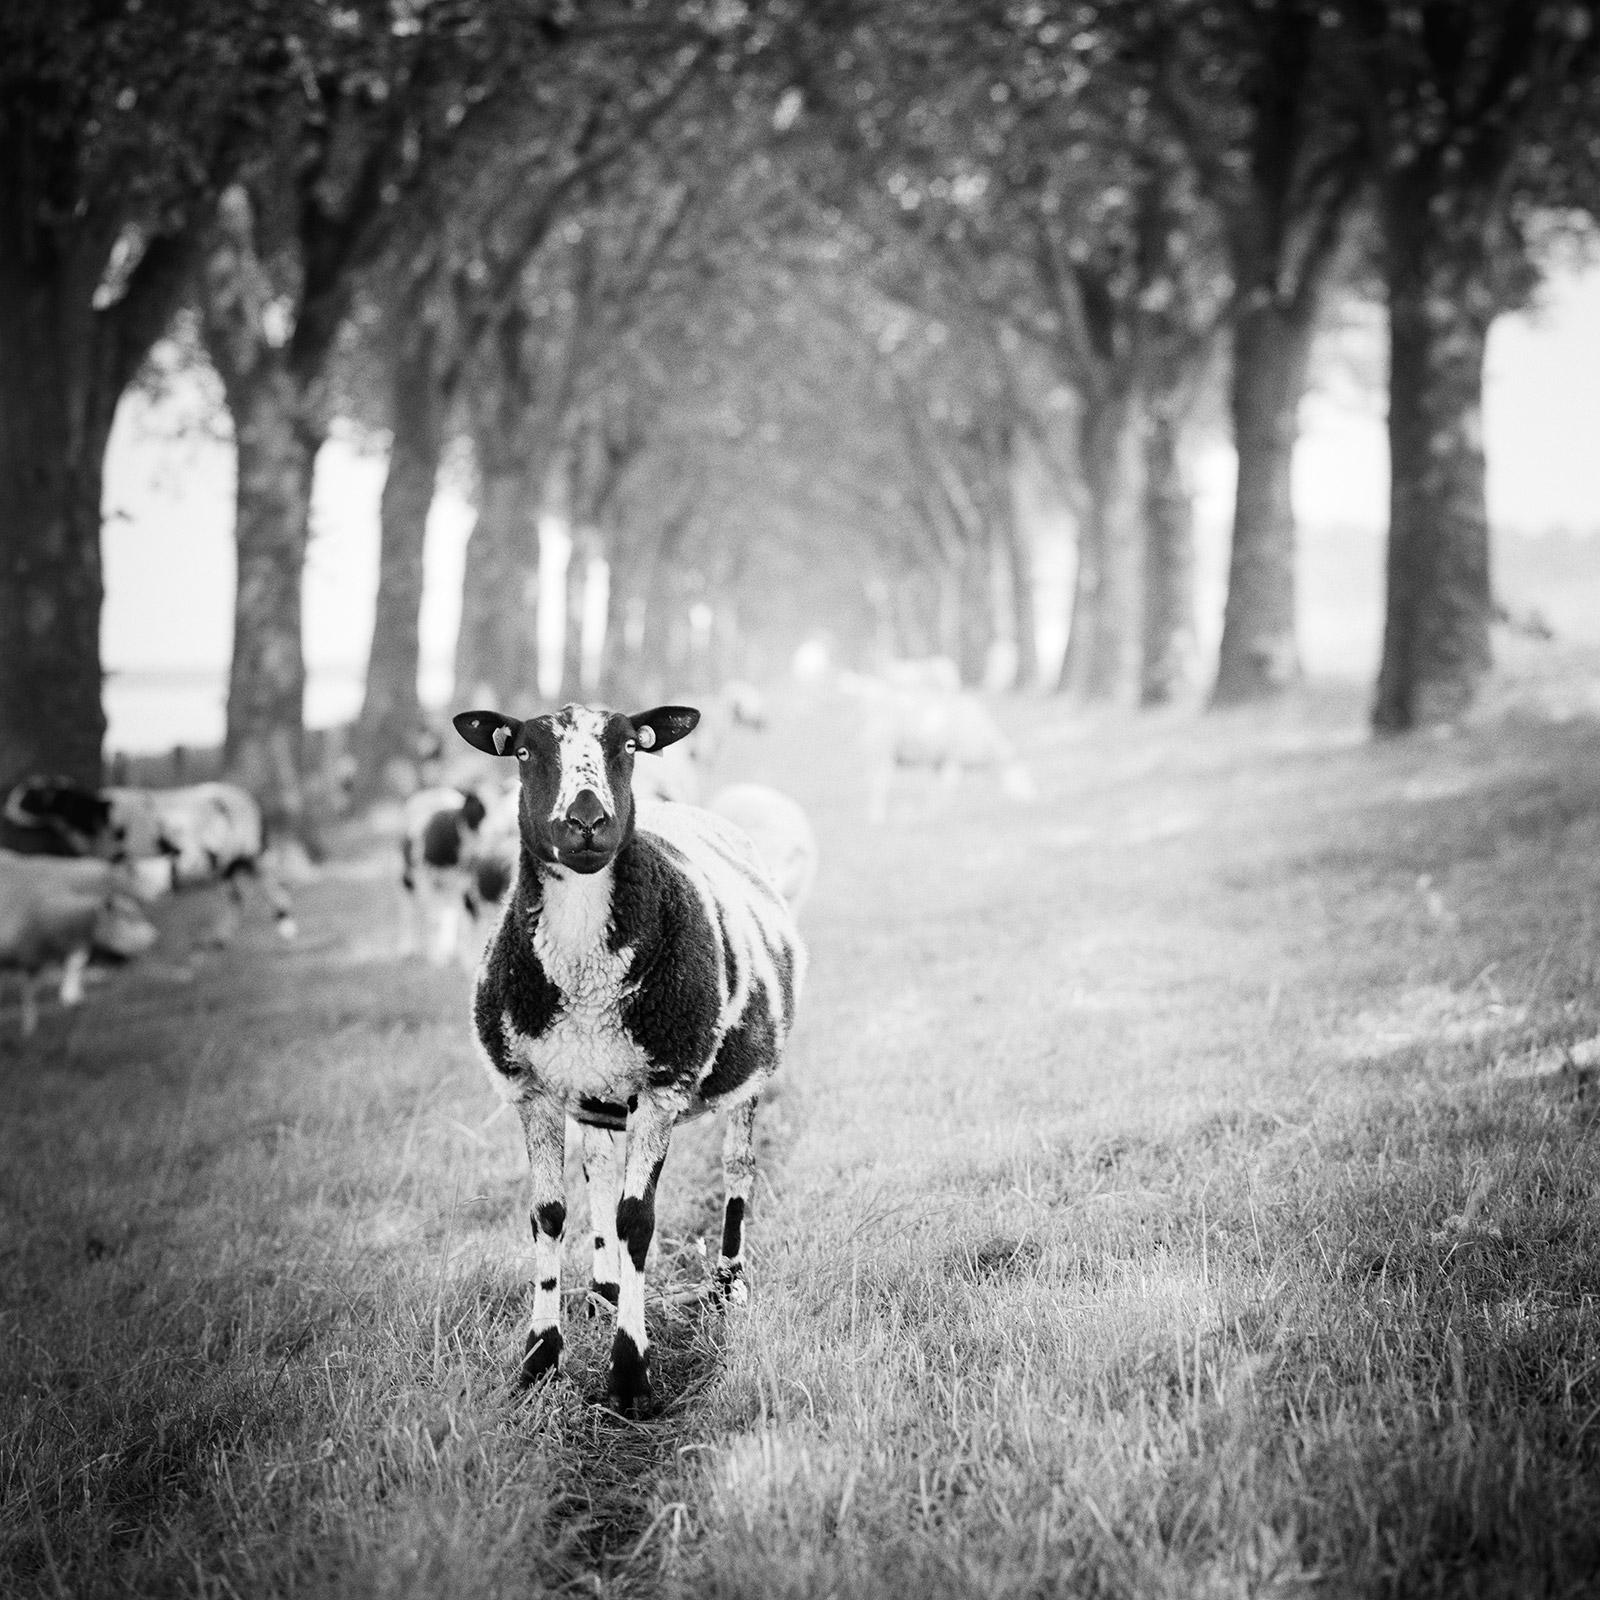 Gerald Berghammer Black and White Photograph - Shaun the Sheep, tree avenue, black and white fine art landscape photography